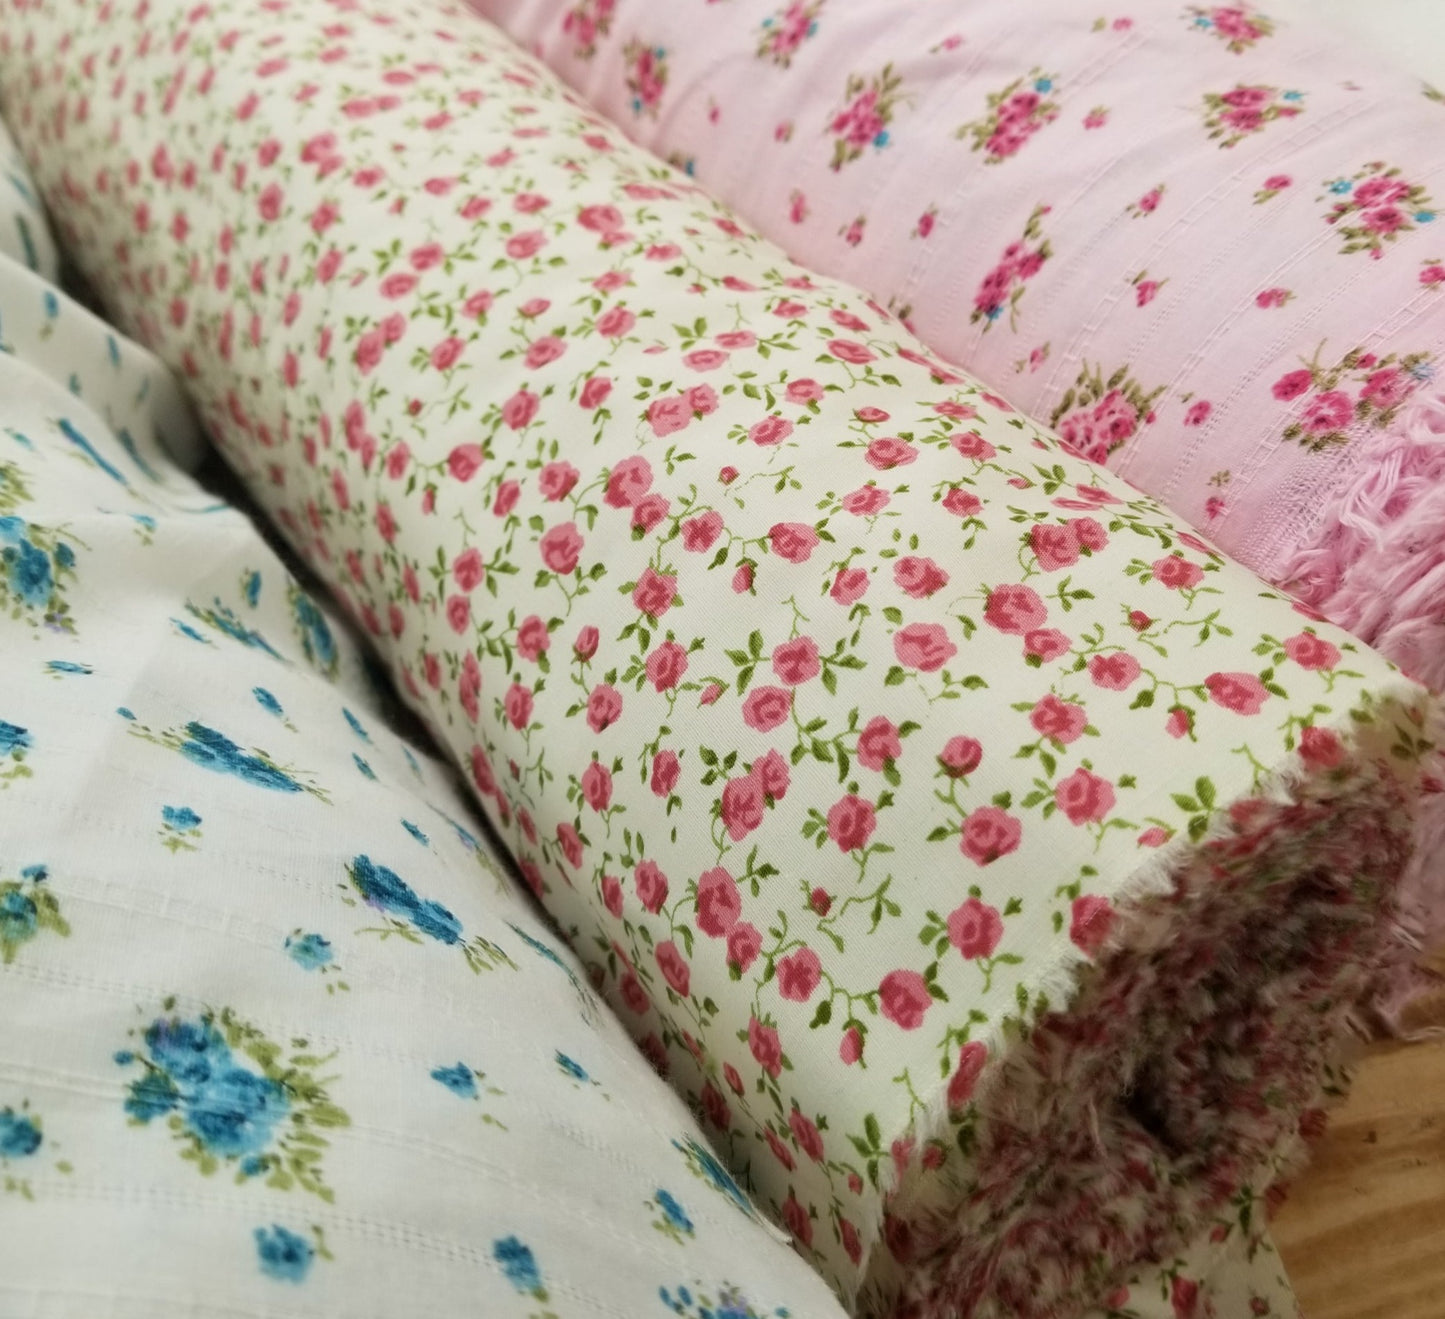 Designer Deadstock Vintage Cottage Roses Pink 100% Cotton Textured 3oz Lawn- Sold by the yard